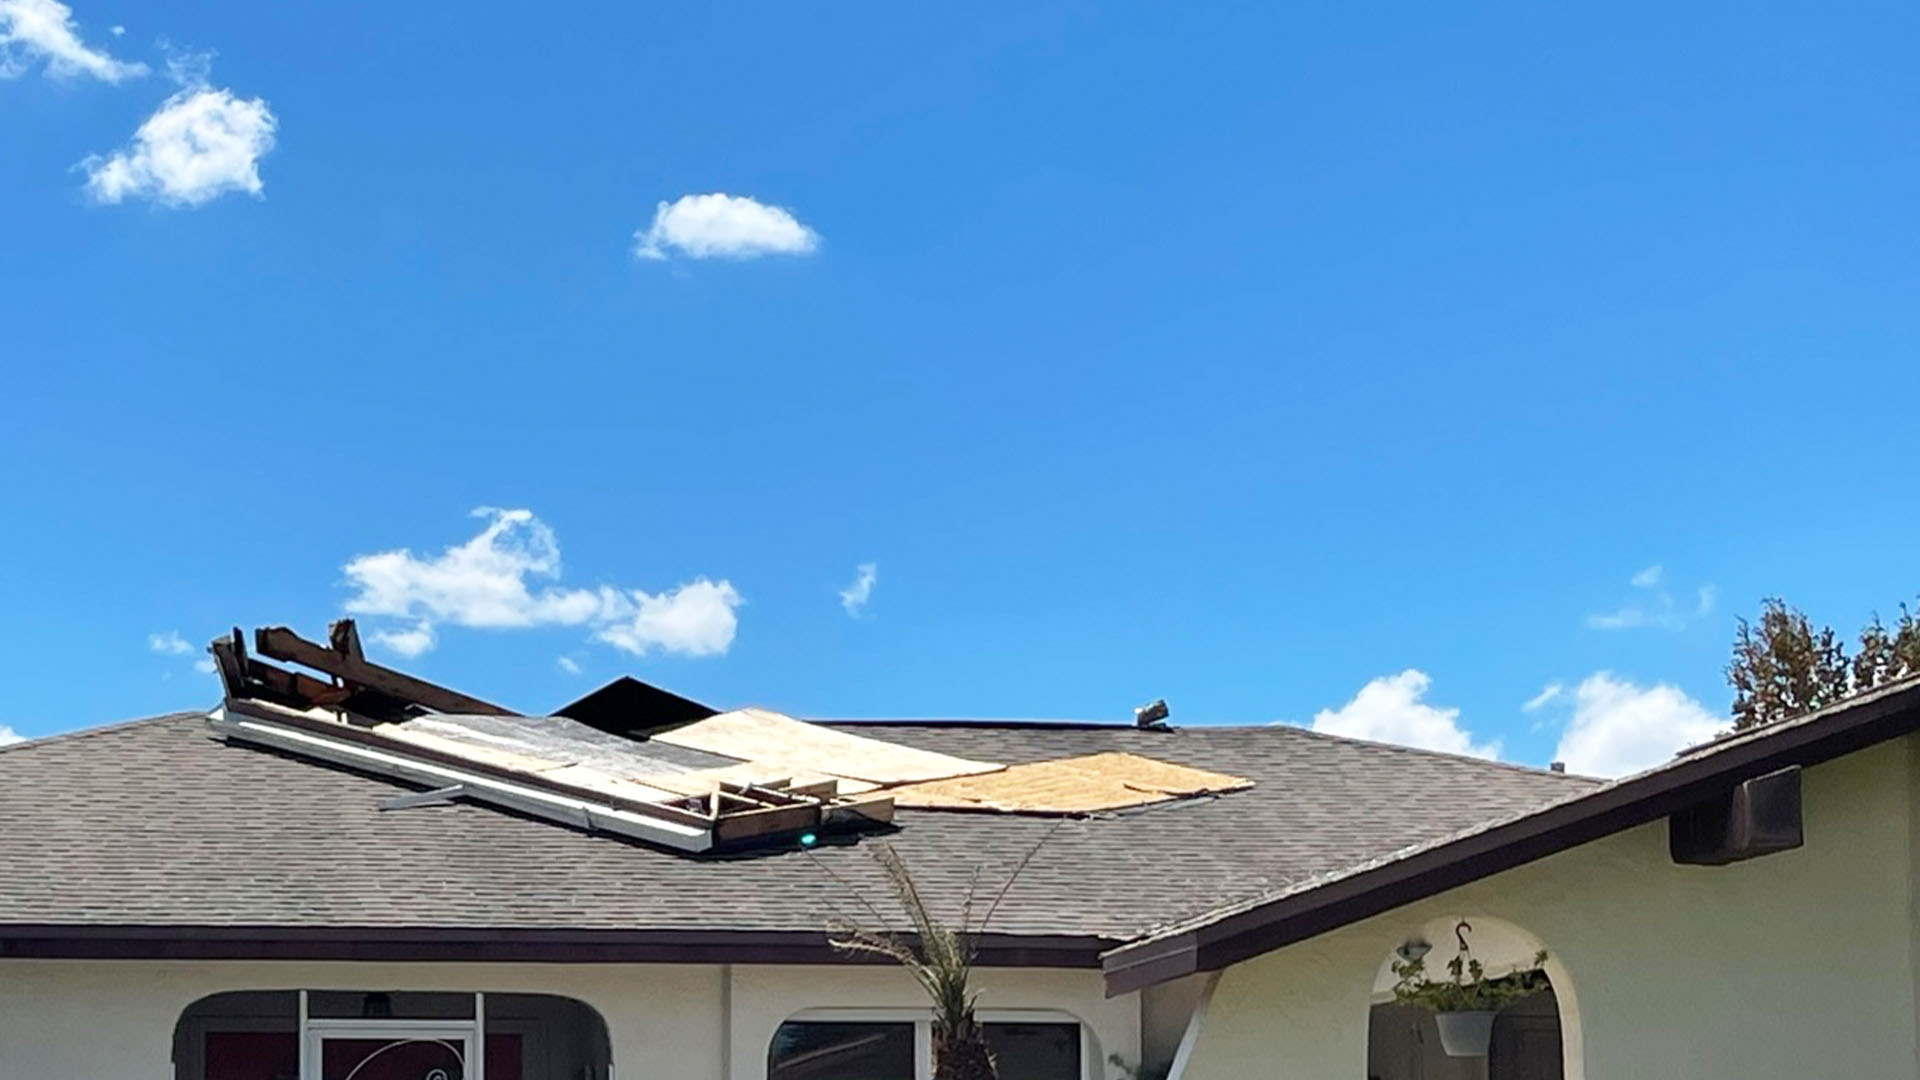 Residential Roof Damage from Hurricane Ian